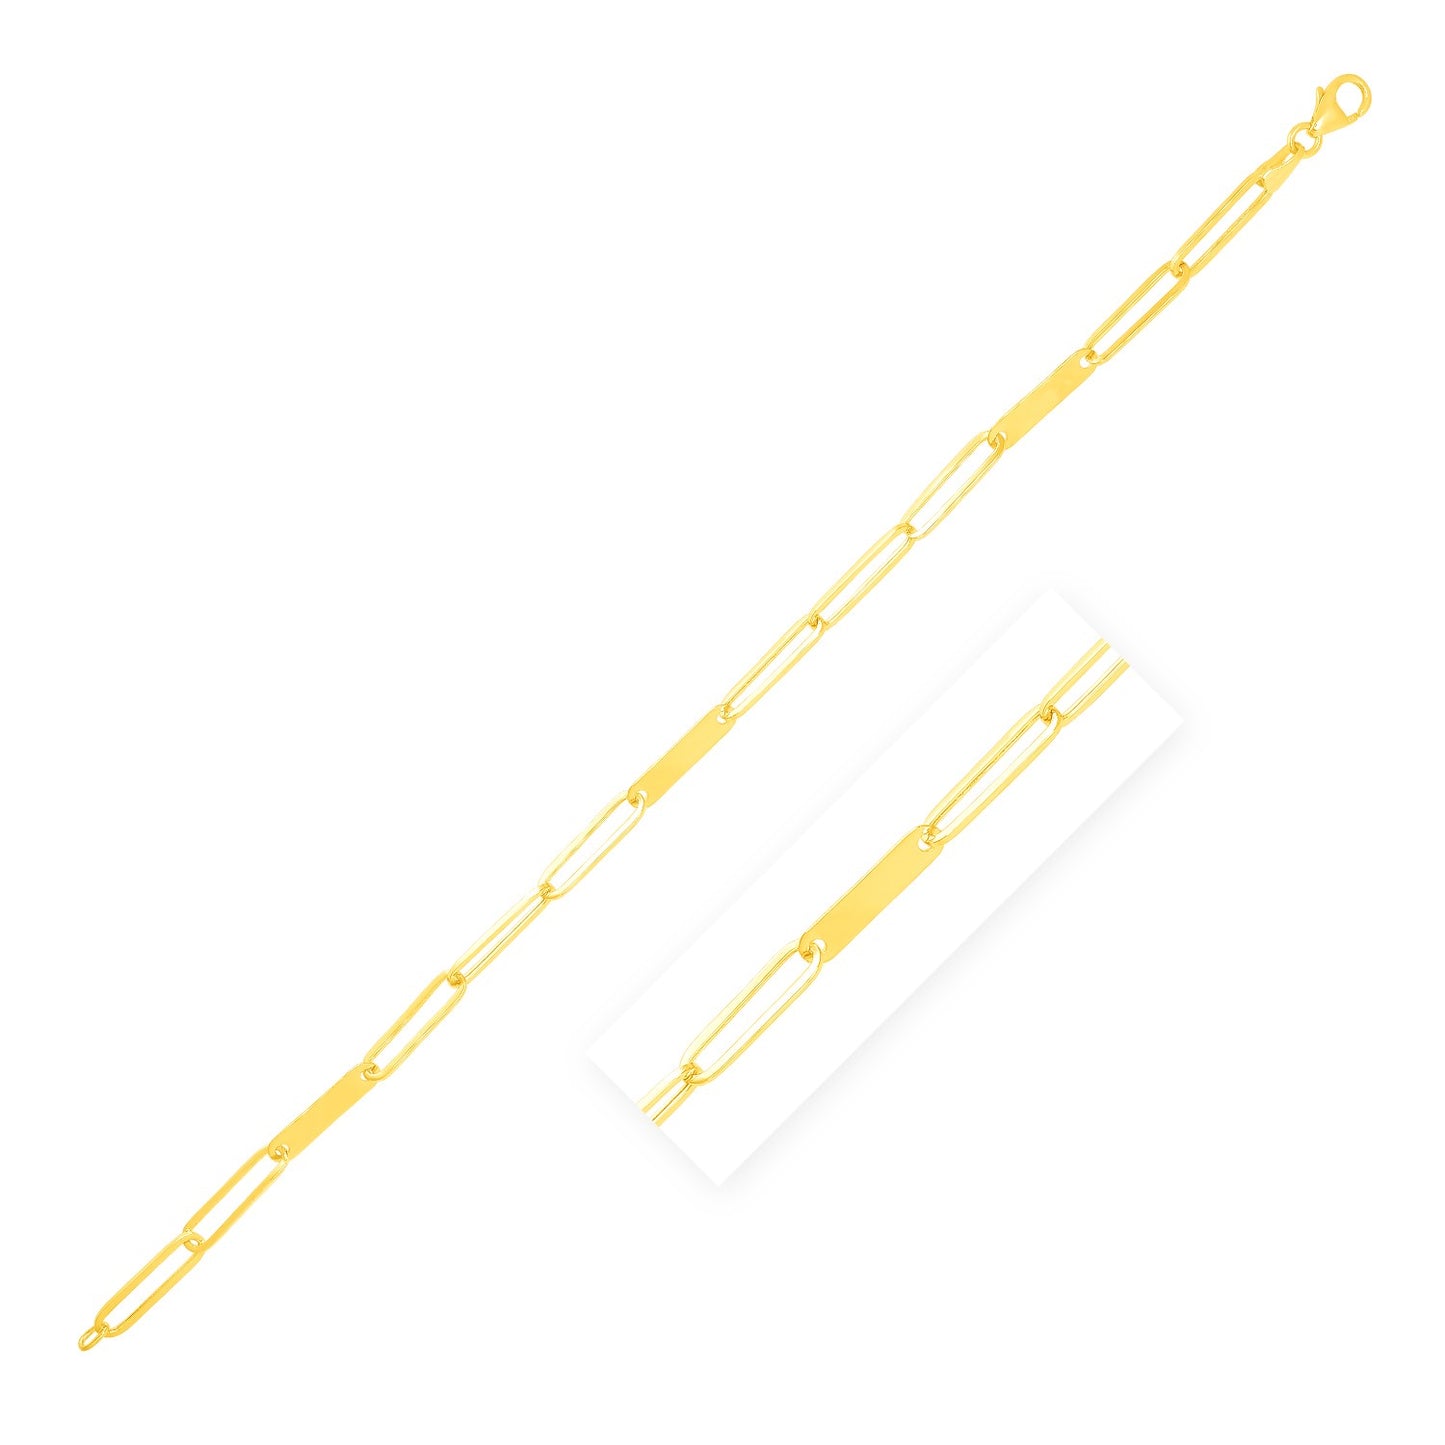 14k Yellow Gold 7 inch Alternating Paperclip Chain Link and Gold Bar Bracelet